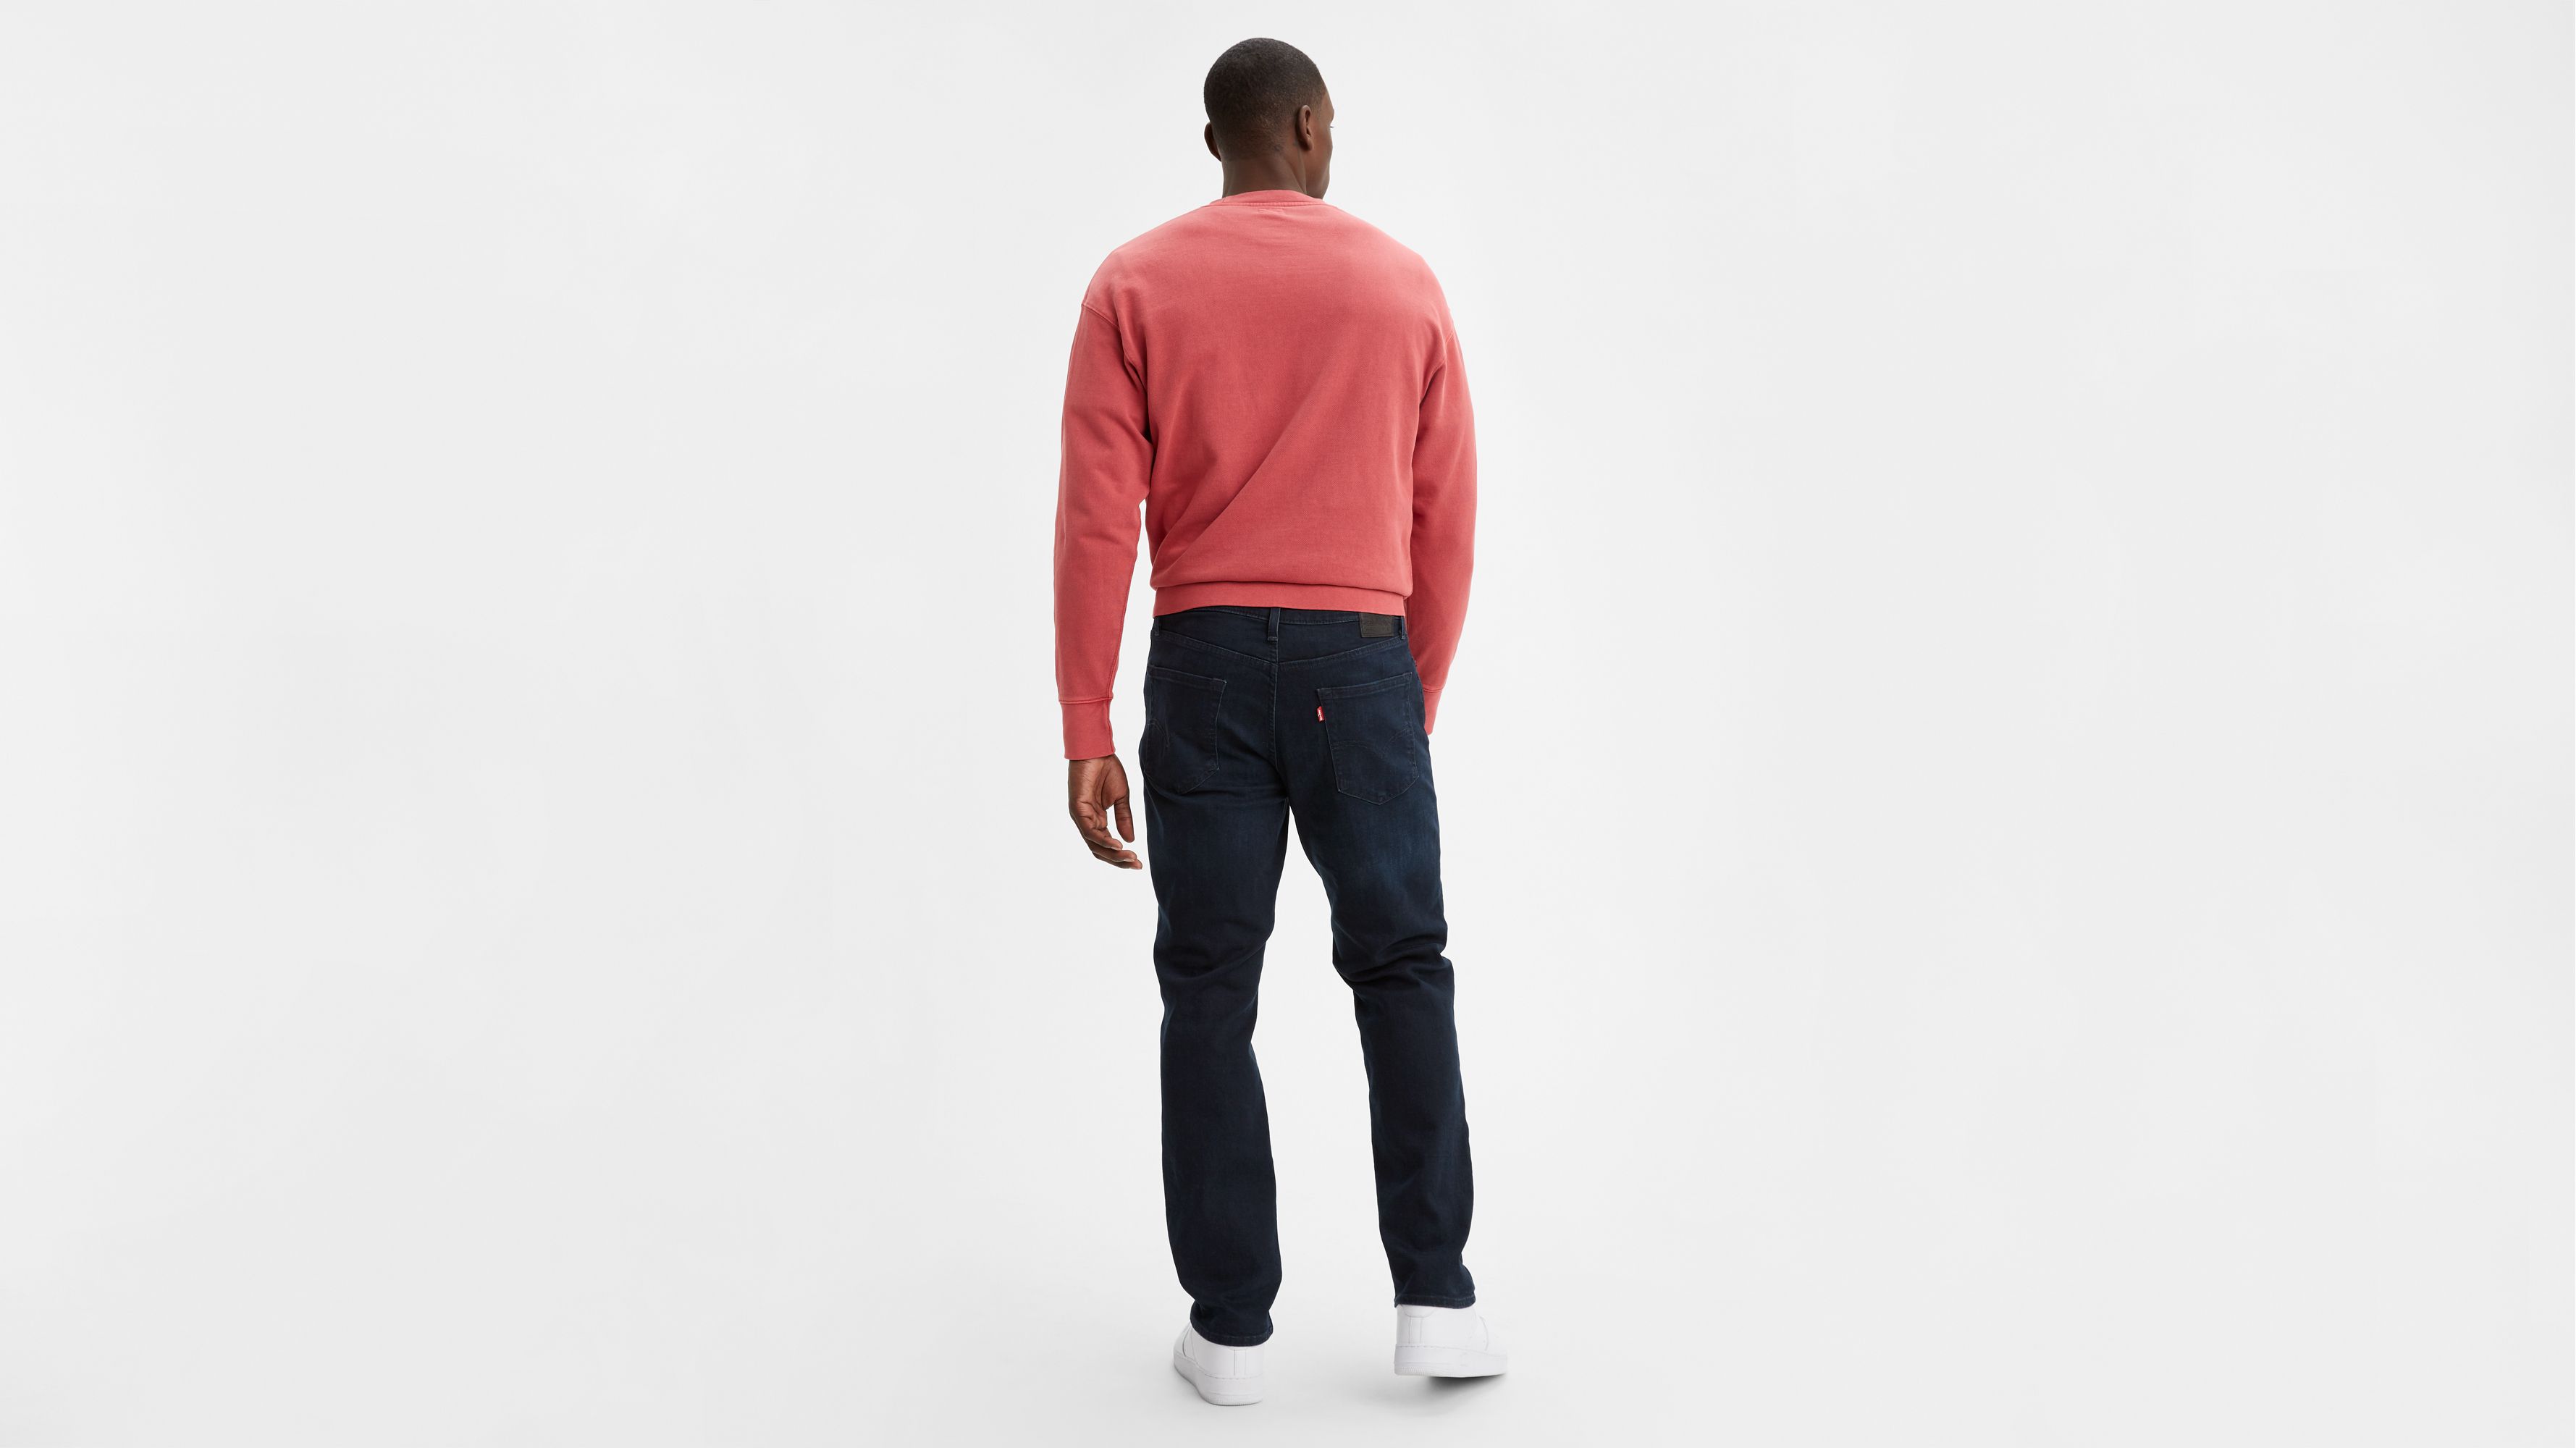 mens red levi jeans